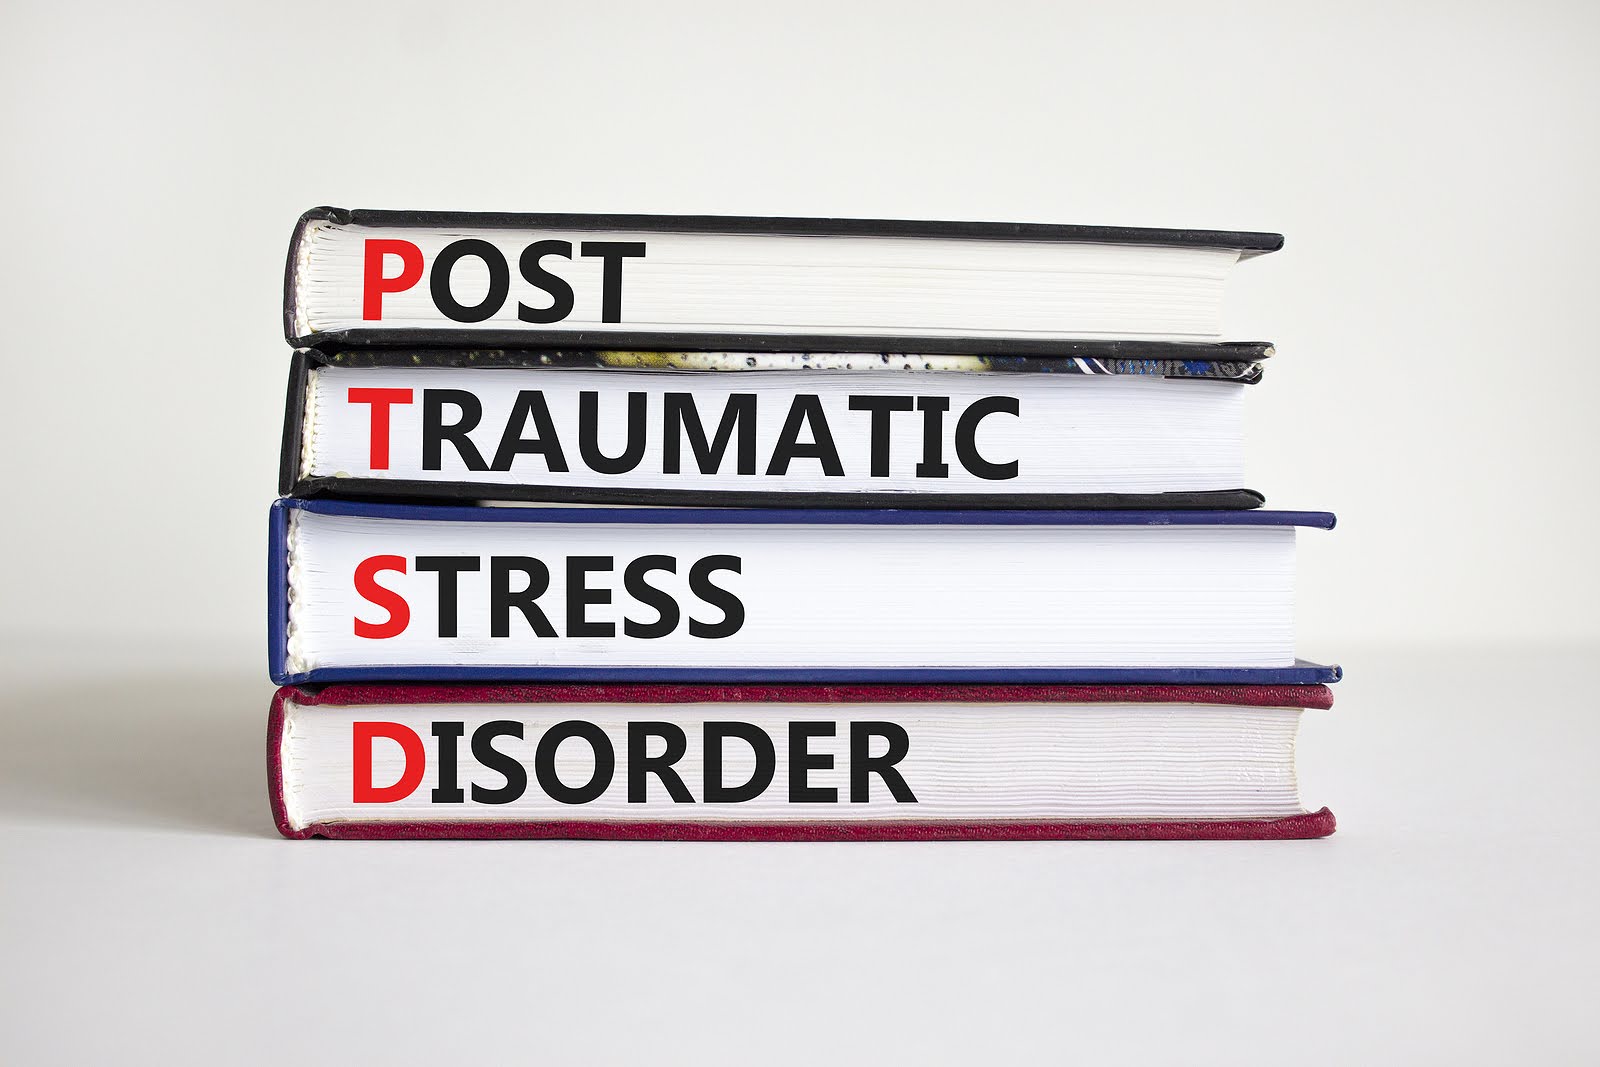 A stack of books with the words Post Traumatic Stress Disorder on them sit on a white surface. There are several ways to treat PTSD effectively. Our PTSD therapists in Ohio specialize in PTSD treatment and are here to help.